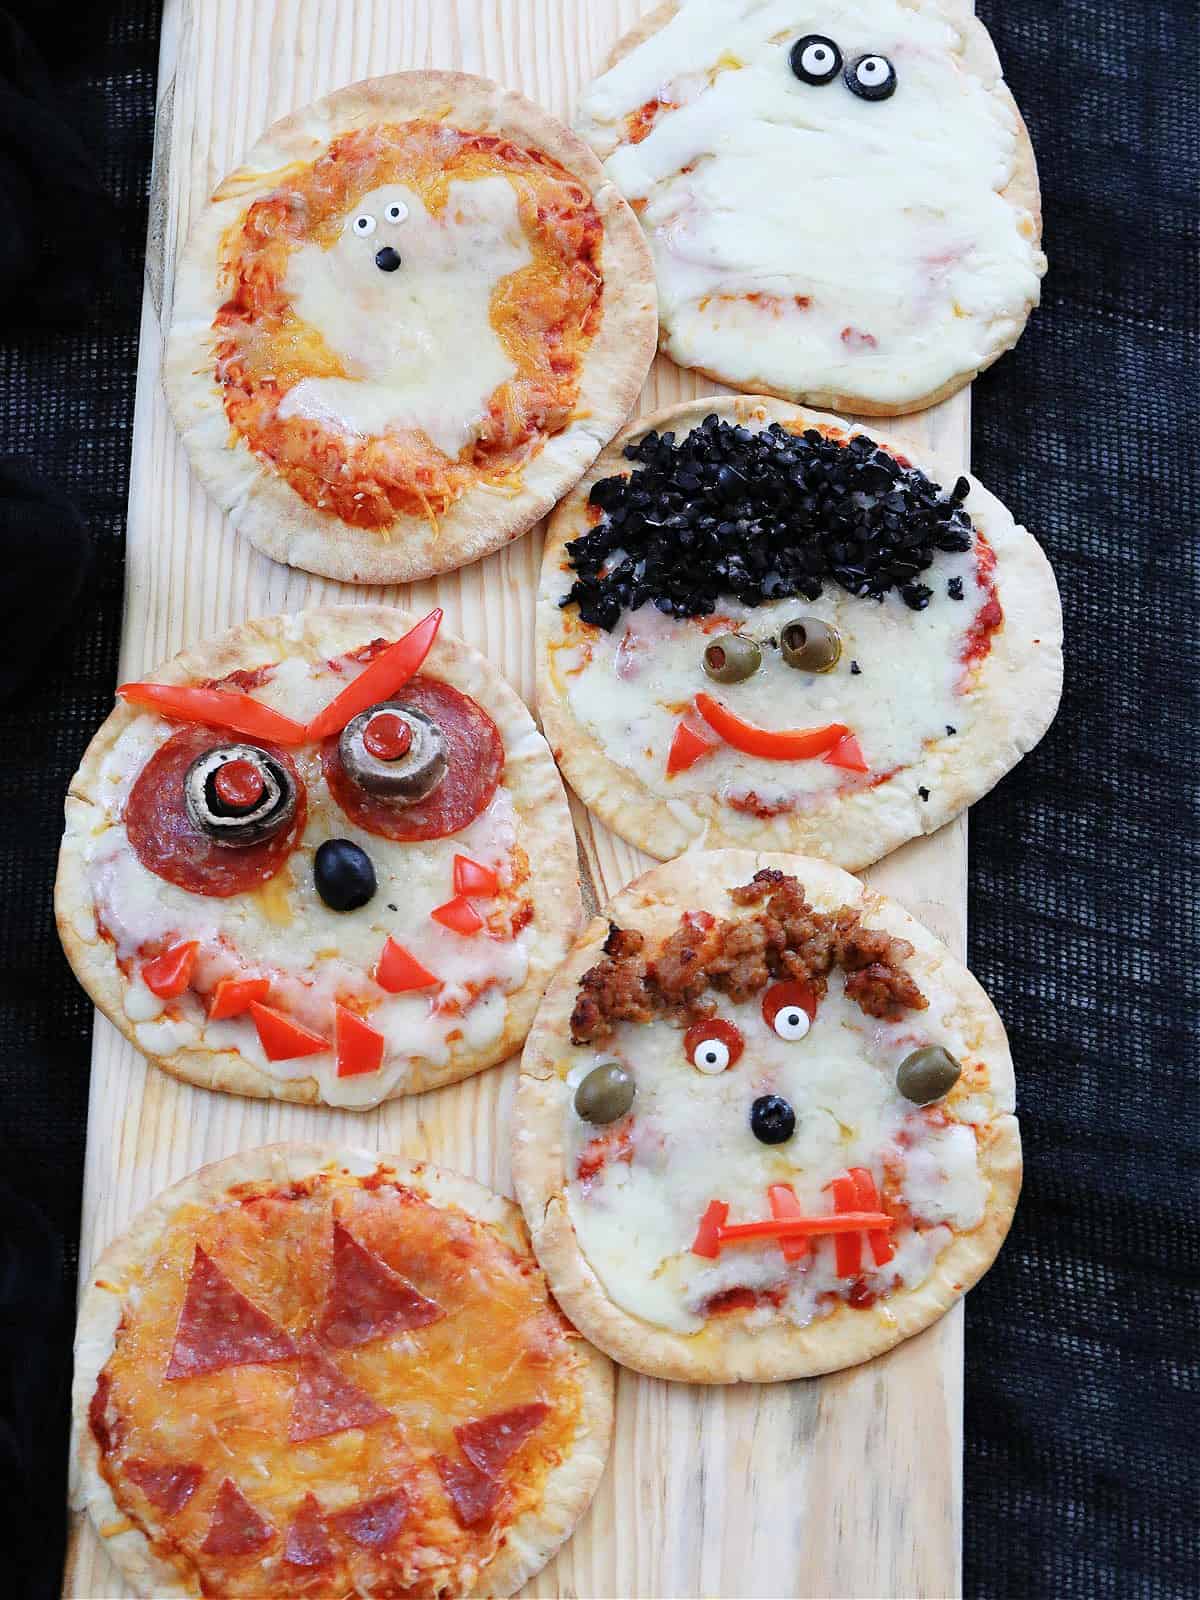 Six baked Halloween pizzas on a board decorated to look like ghosts, pumpkins, dracula, frankenstein, and monsters.